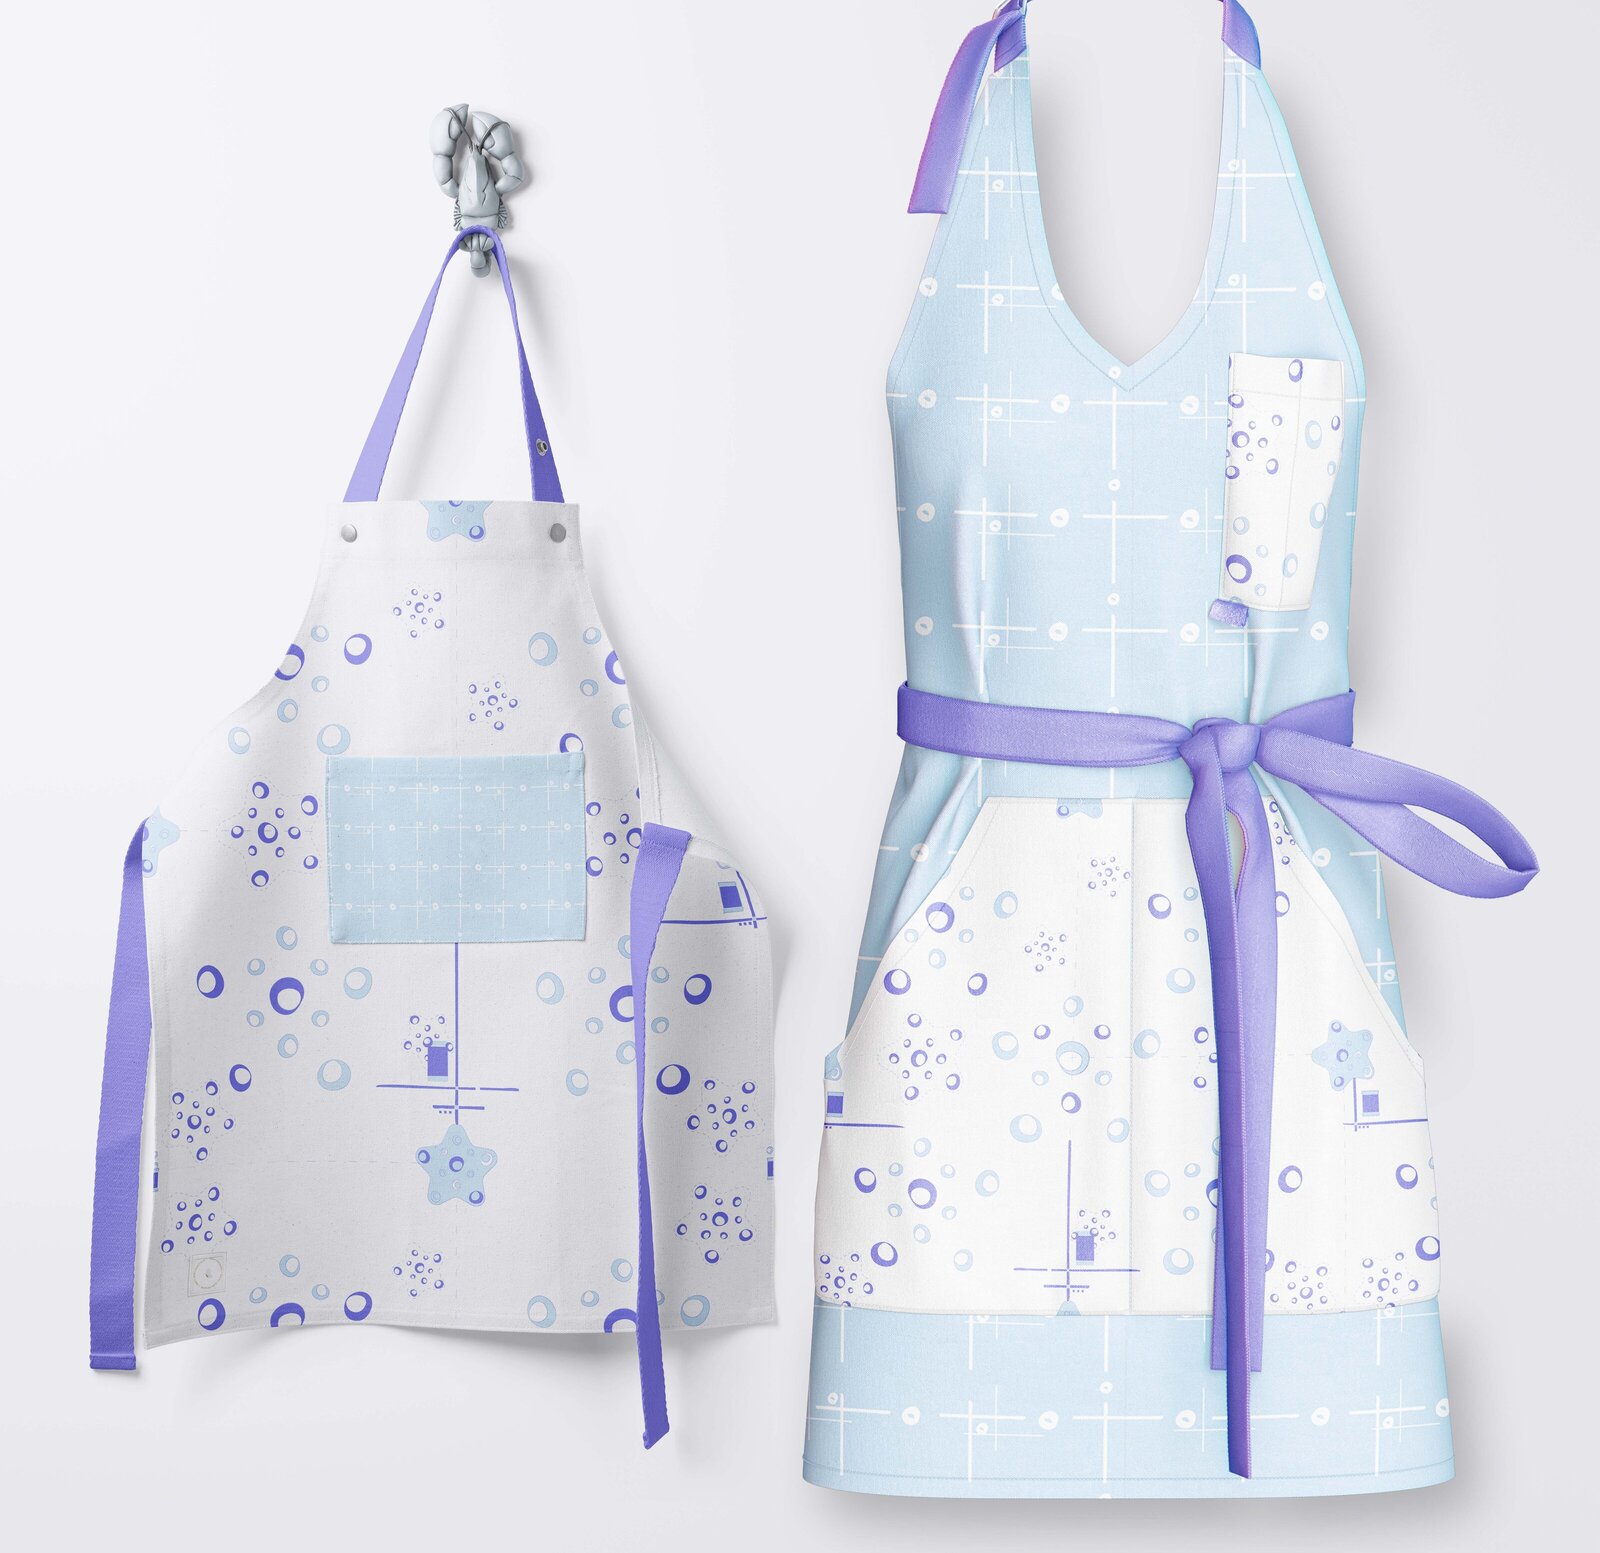 Charisse-Marei-pattern-design-on-fabric-aprons